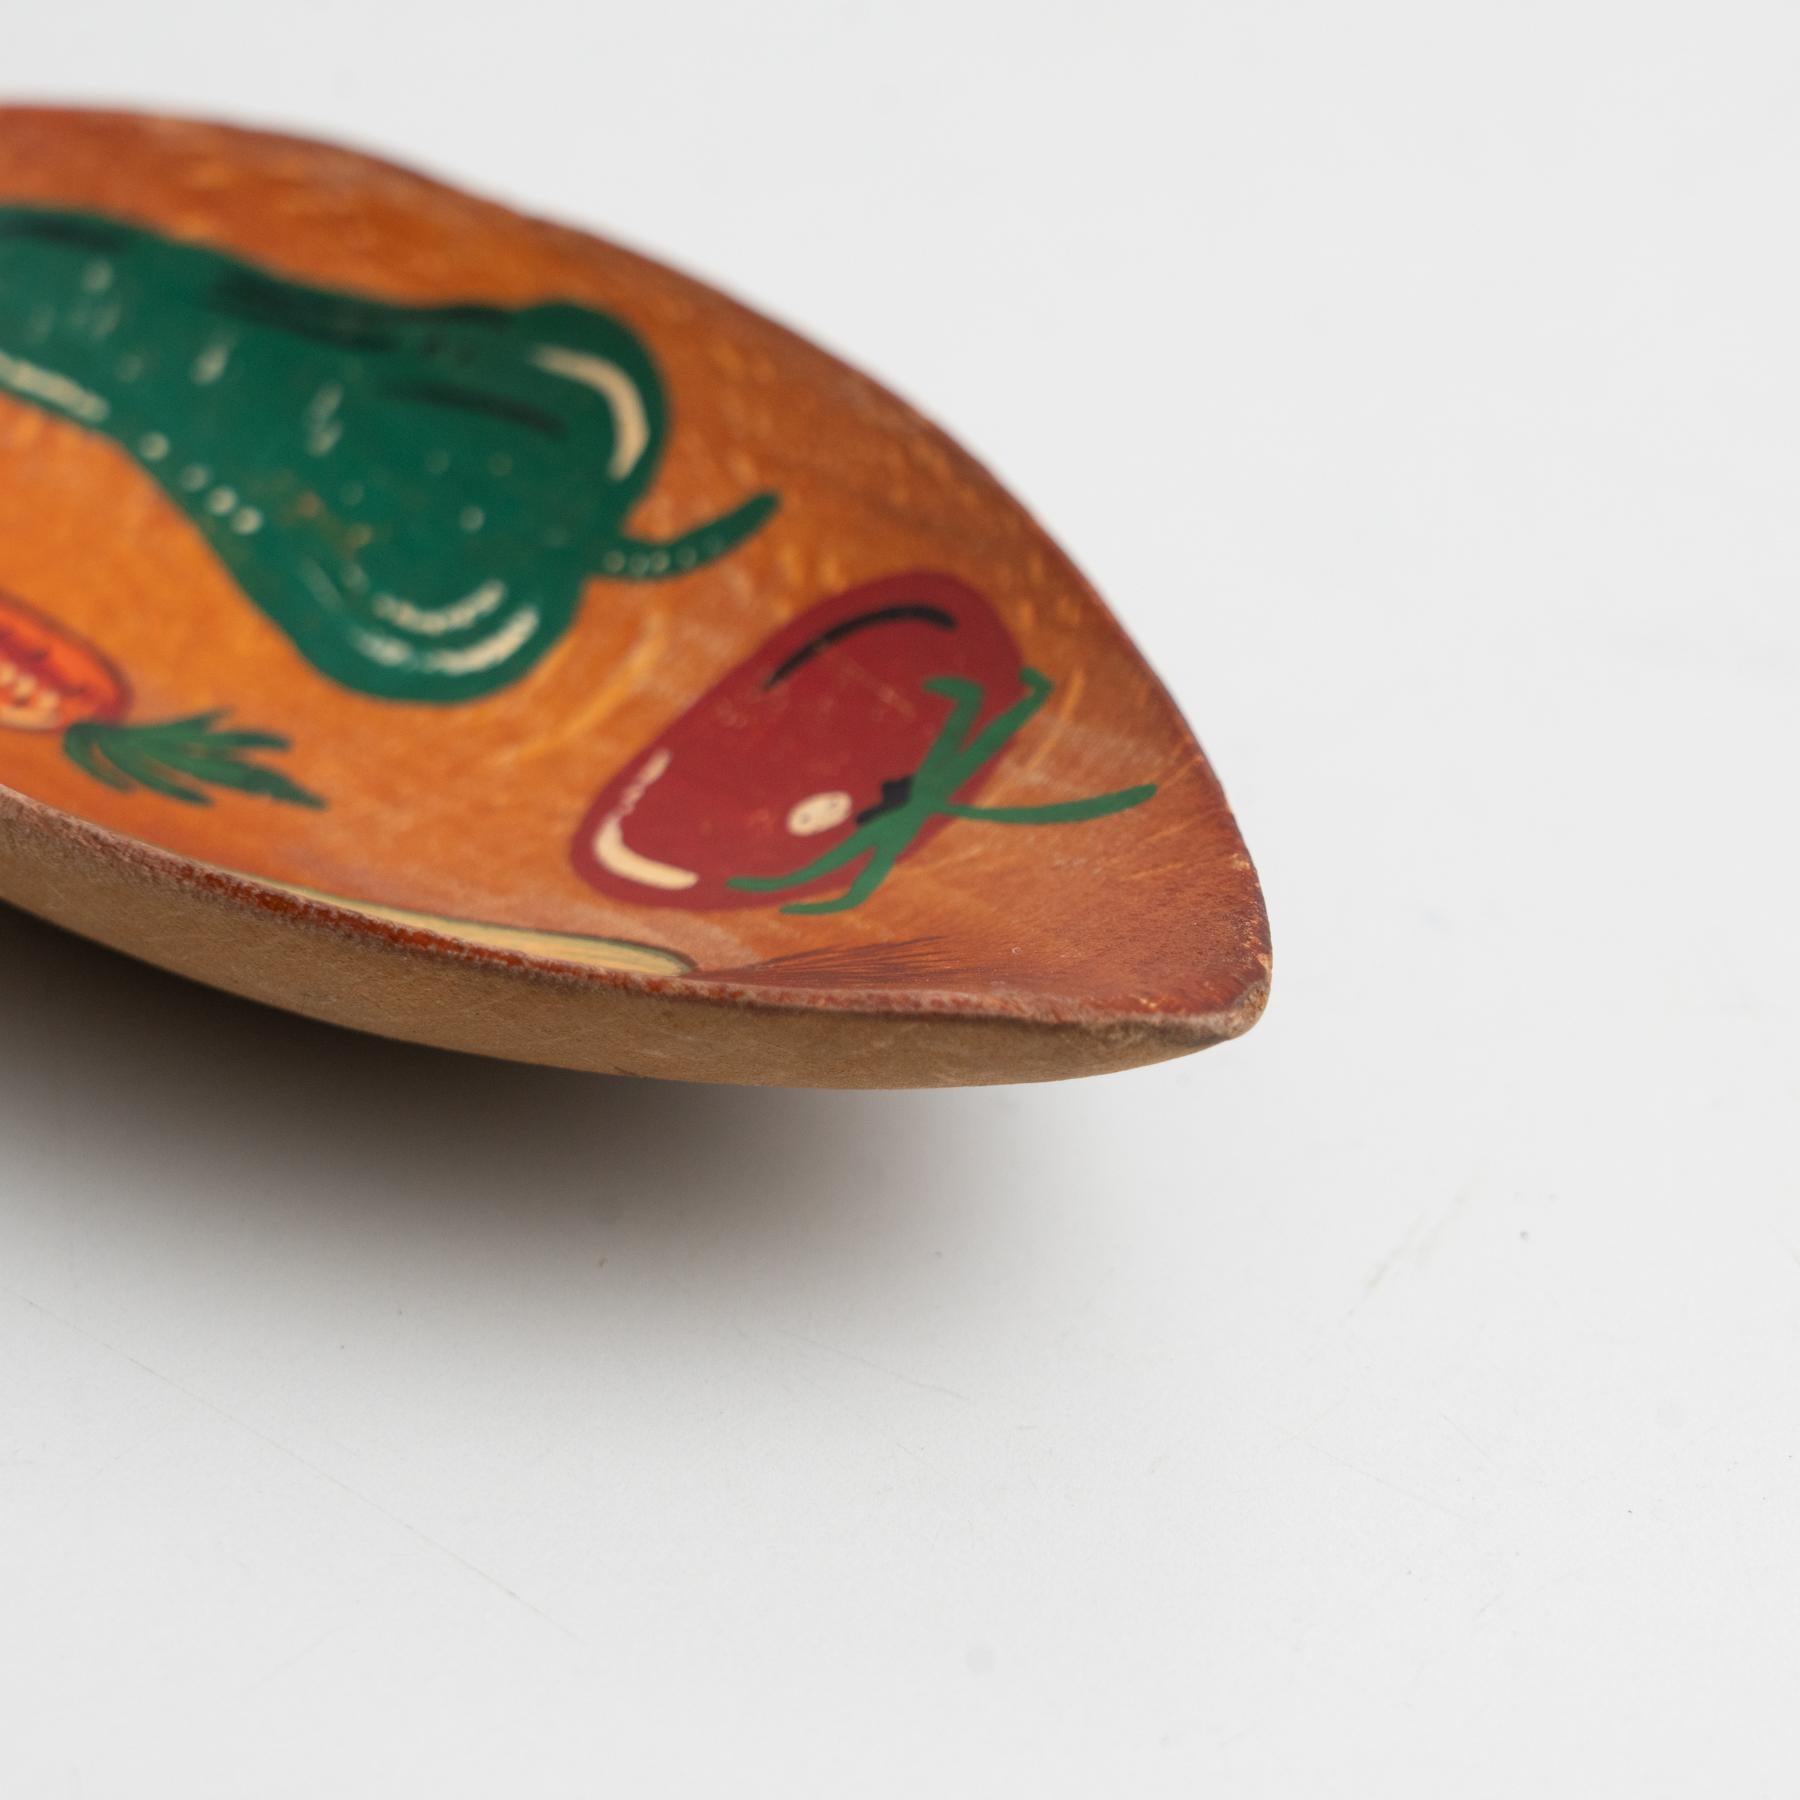 Traditional Rustic Wood Hand Painted Spoon Artwork from Spain, circa 1970 For Sale 4